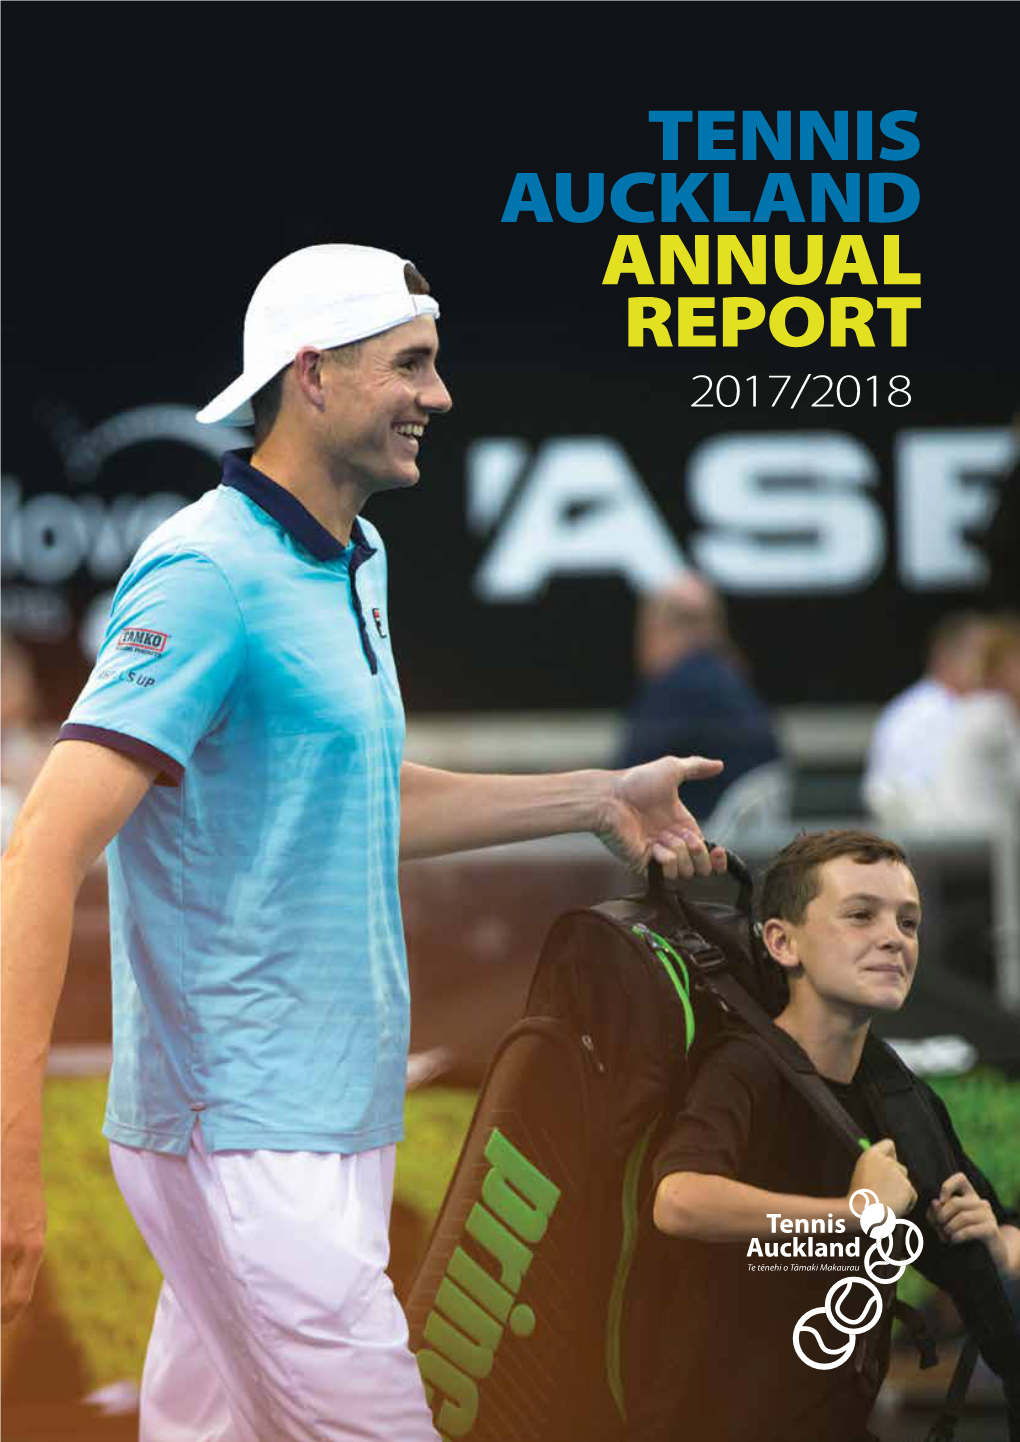 TENNIS AUCKLAND ANNUAL REPORT 2017/2018 Roberto Bautista-Agut OUR VISION to Make Tennis a Part of Every Aucklander’S Life